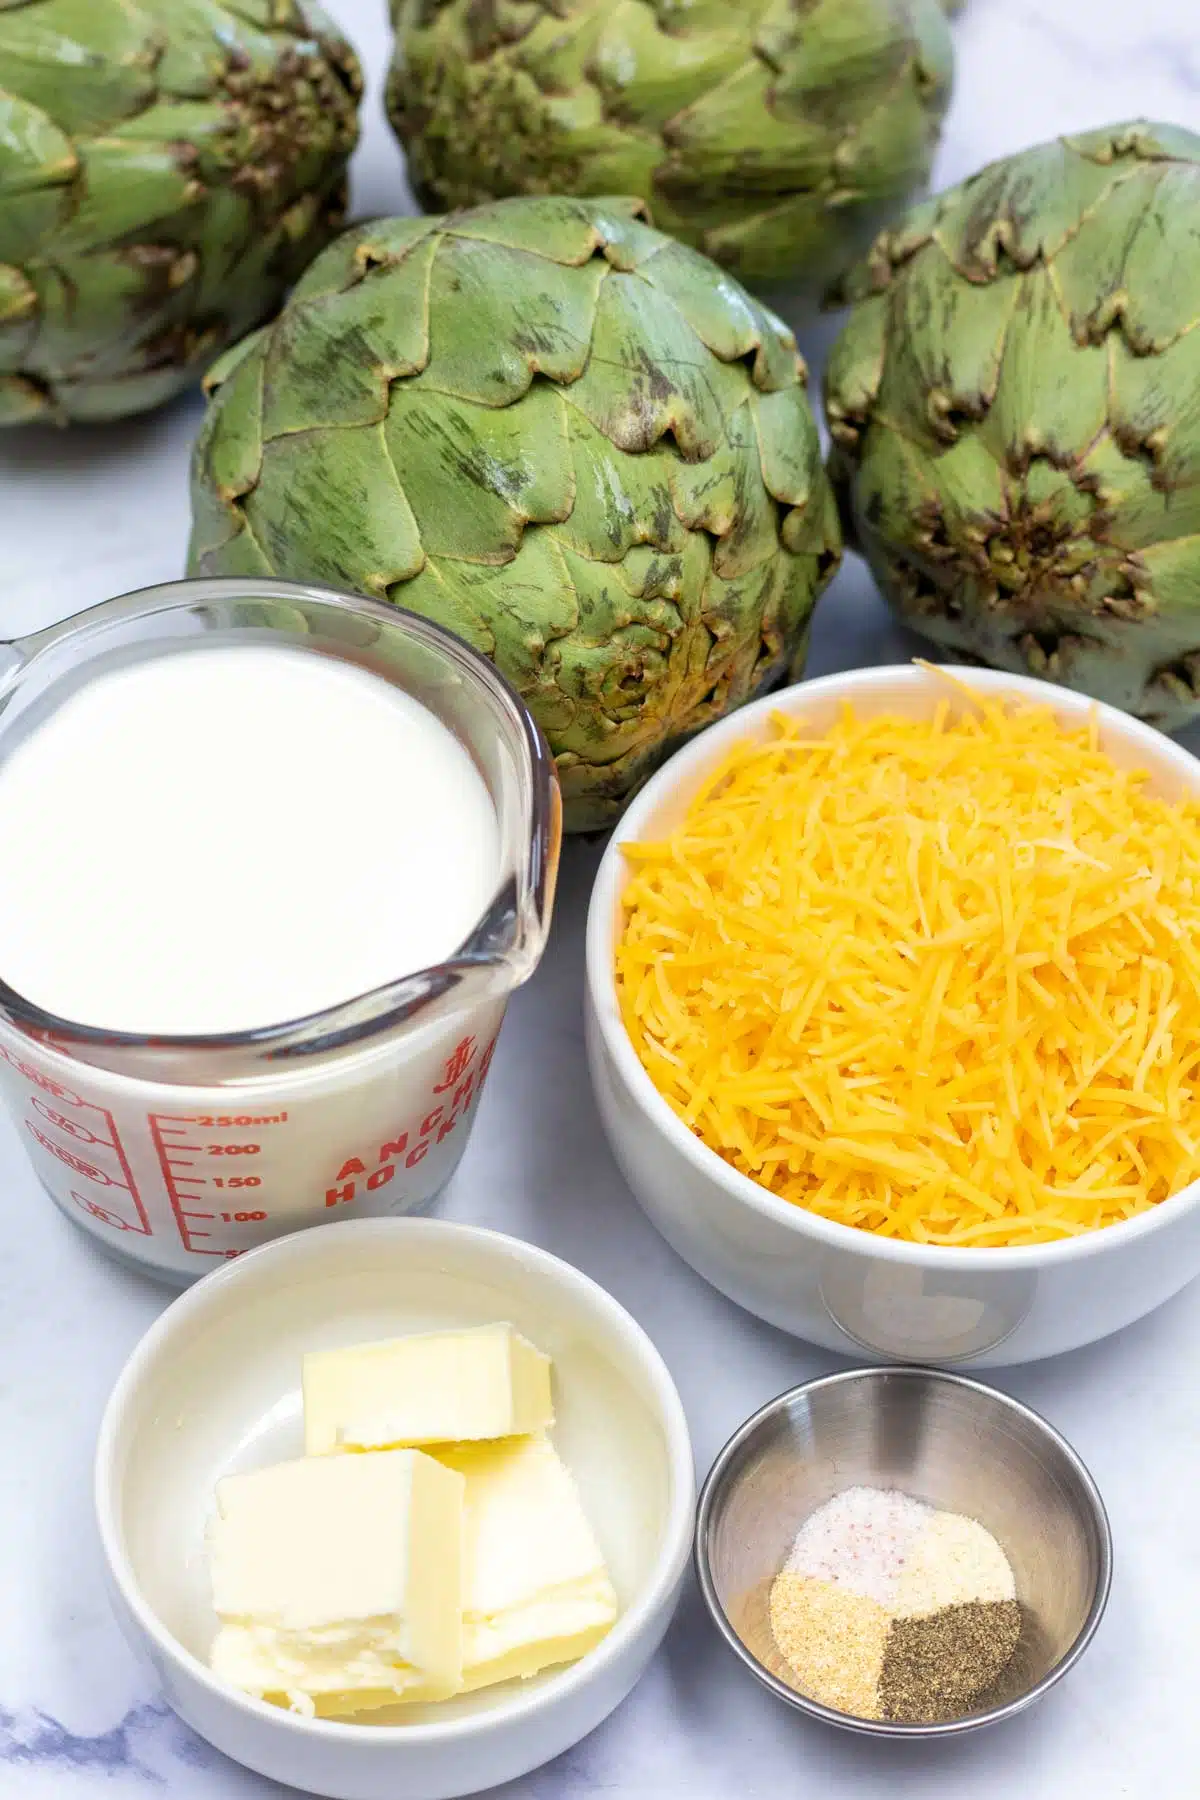 Tall image showing the ingredients needed for steamed artichokes and cheese sauce.